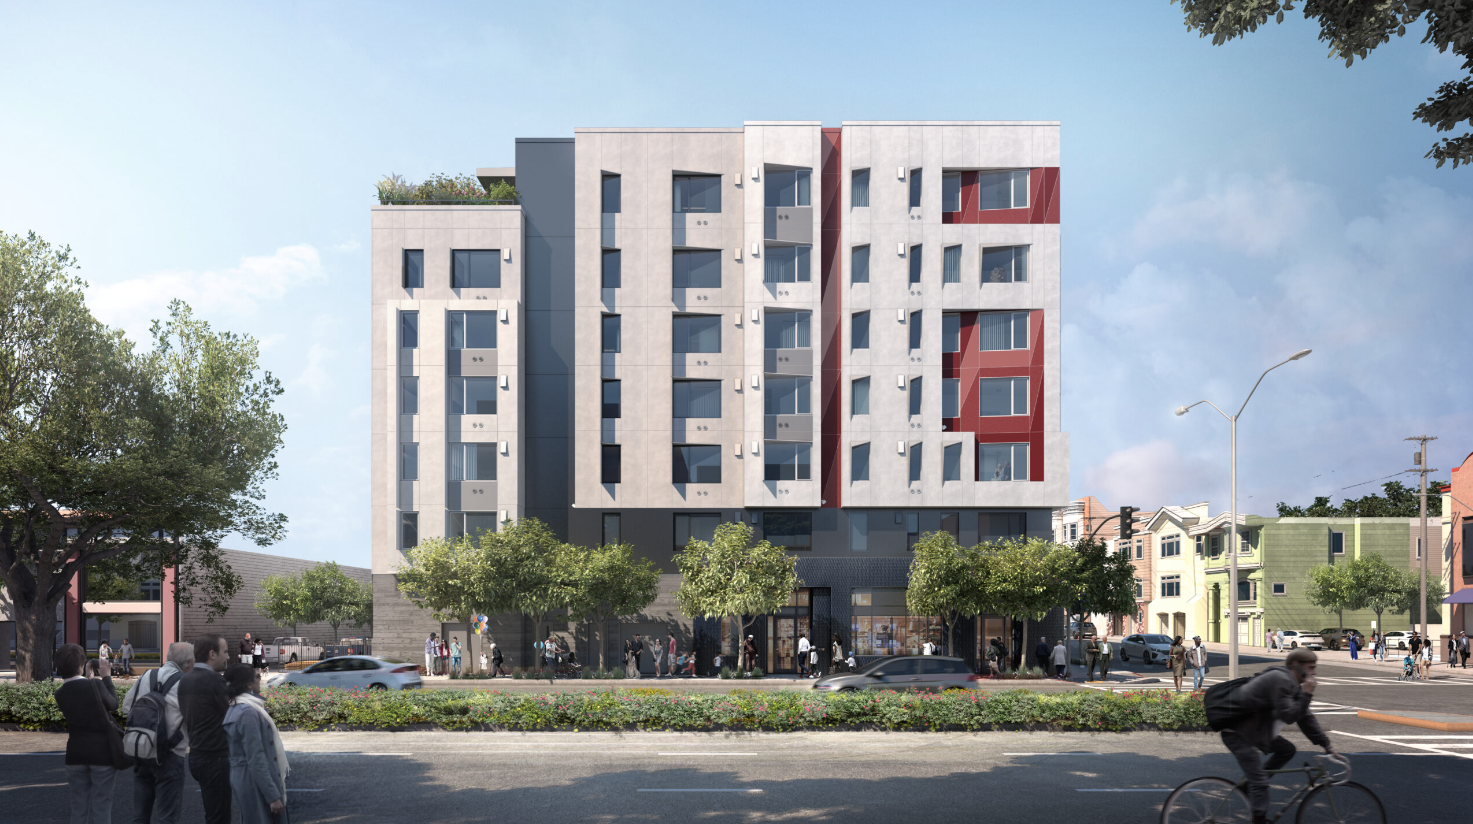 4200 Geary Blvd Affordable Housing - San Francisco, CA